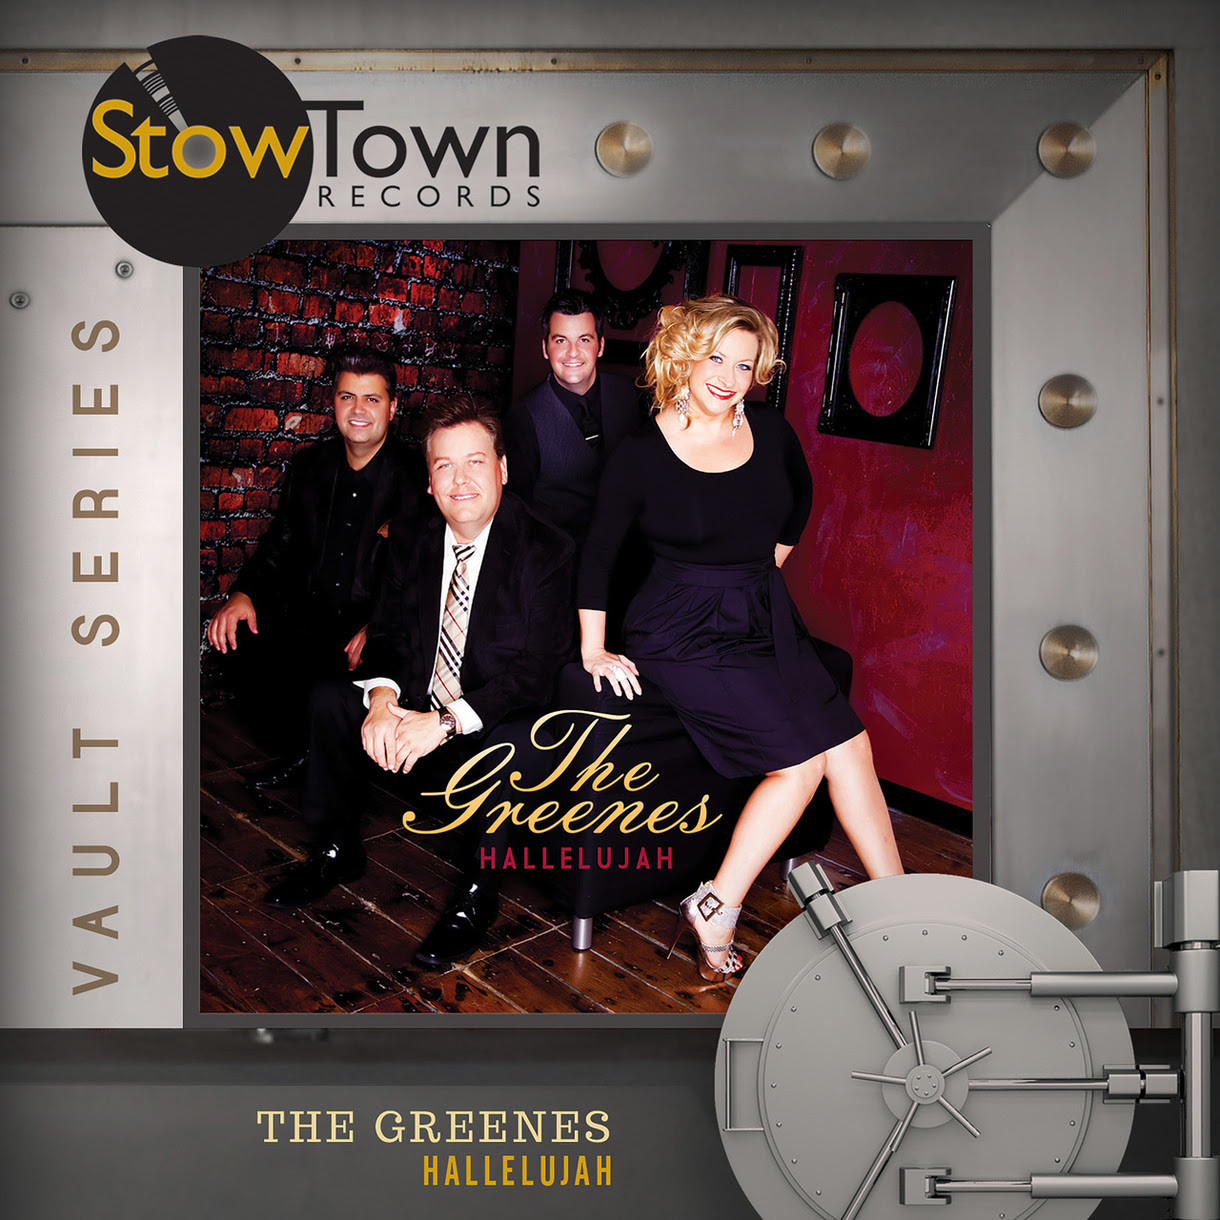 StowTown Records Announces the Digital Release of The Greenes' Classic "Hallelujah"